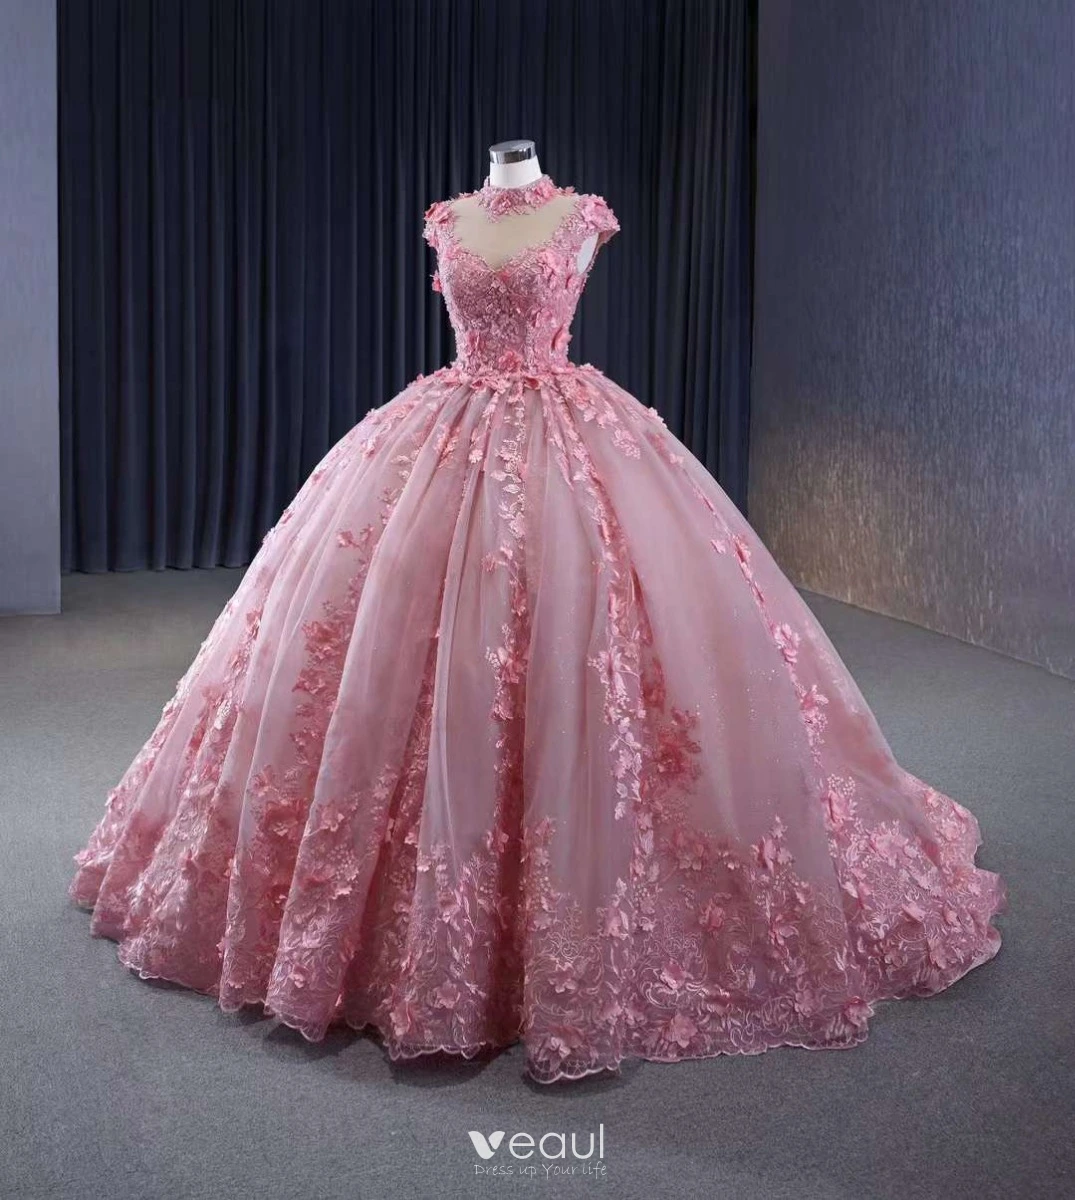 Princess Pink Off Shoulder Quinceanera Ball Gown With Beaded Lace And Pink  Crystals Embellishments, Fluffy Tulle Skirt, Perfect For Prom And Sweet 16  Affordable Vestidos De From Bridalstore, $133.88 | DHgate.Com